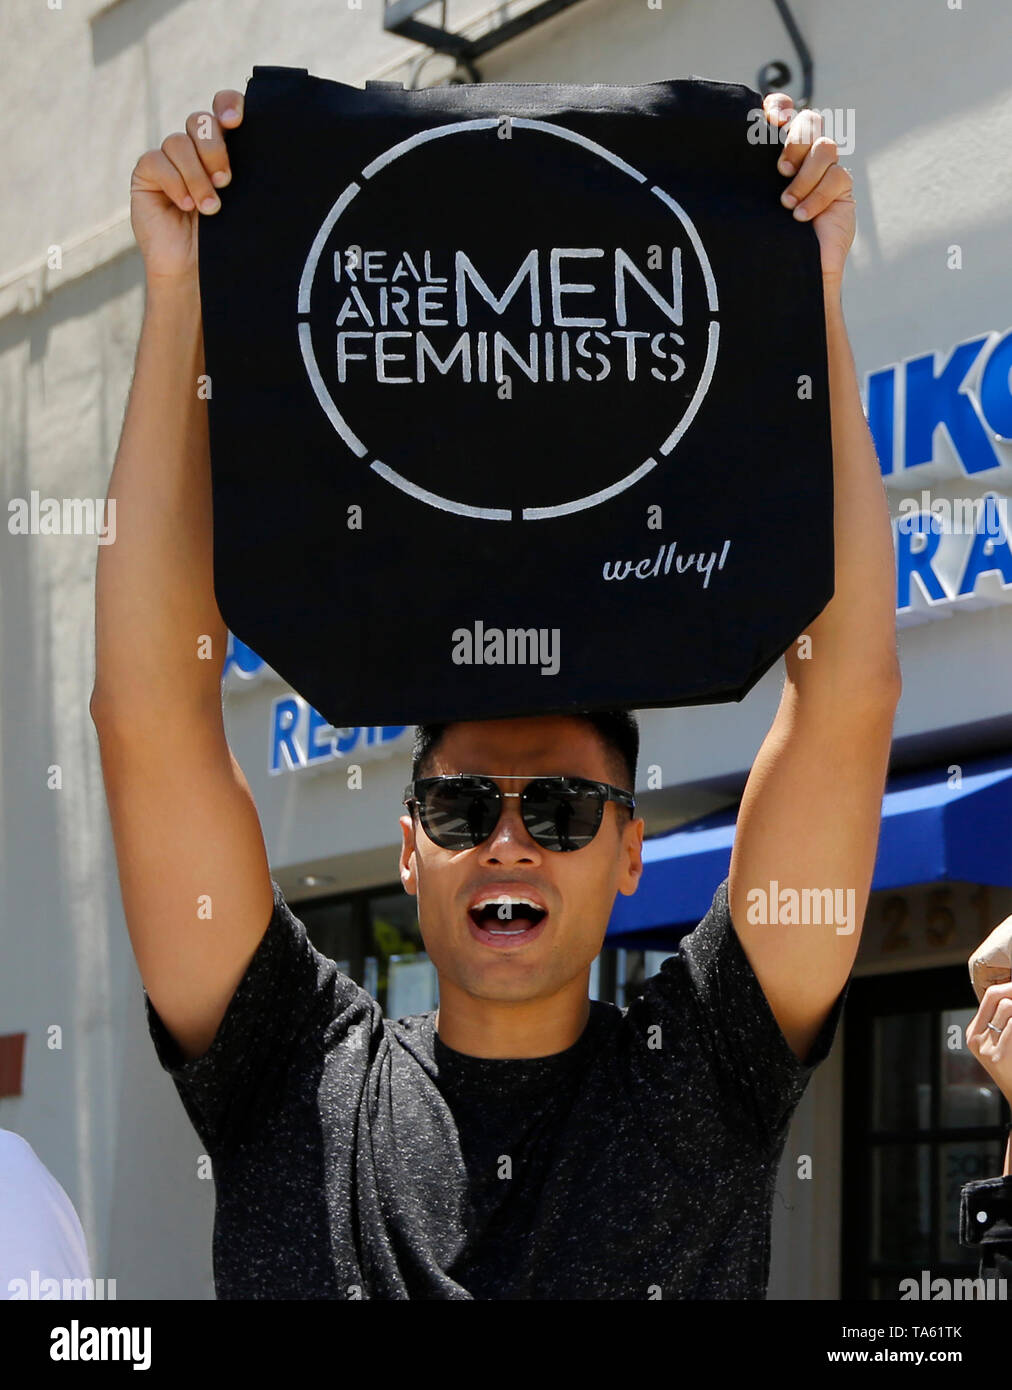 Los Angeles, USA. 21st May, 2019. A man attends a rally in Los Angeles, the United States, on May 21, 2019. Dozens of rallies were held Tuesday in southern California's major cities to denounce the growing number of states passing restrictive abortion laws and demand women's rights in the contentious abortion issue. Credit: Li Ying/Xinhua/Alamy Live News Stock Photo